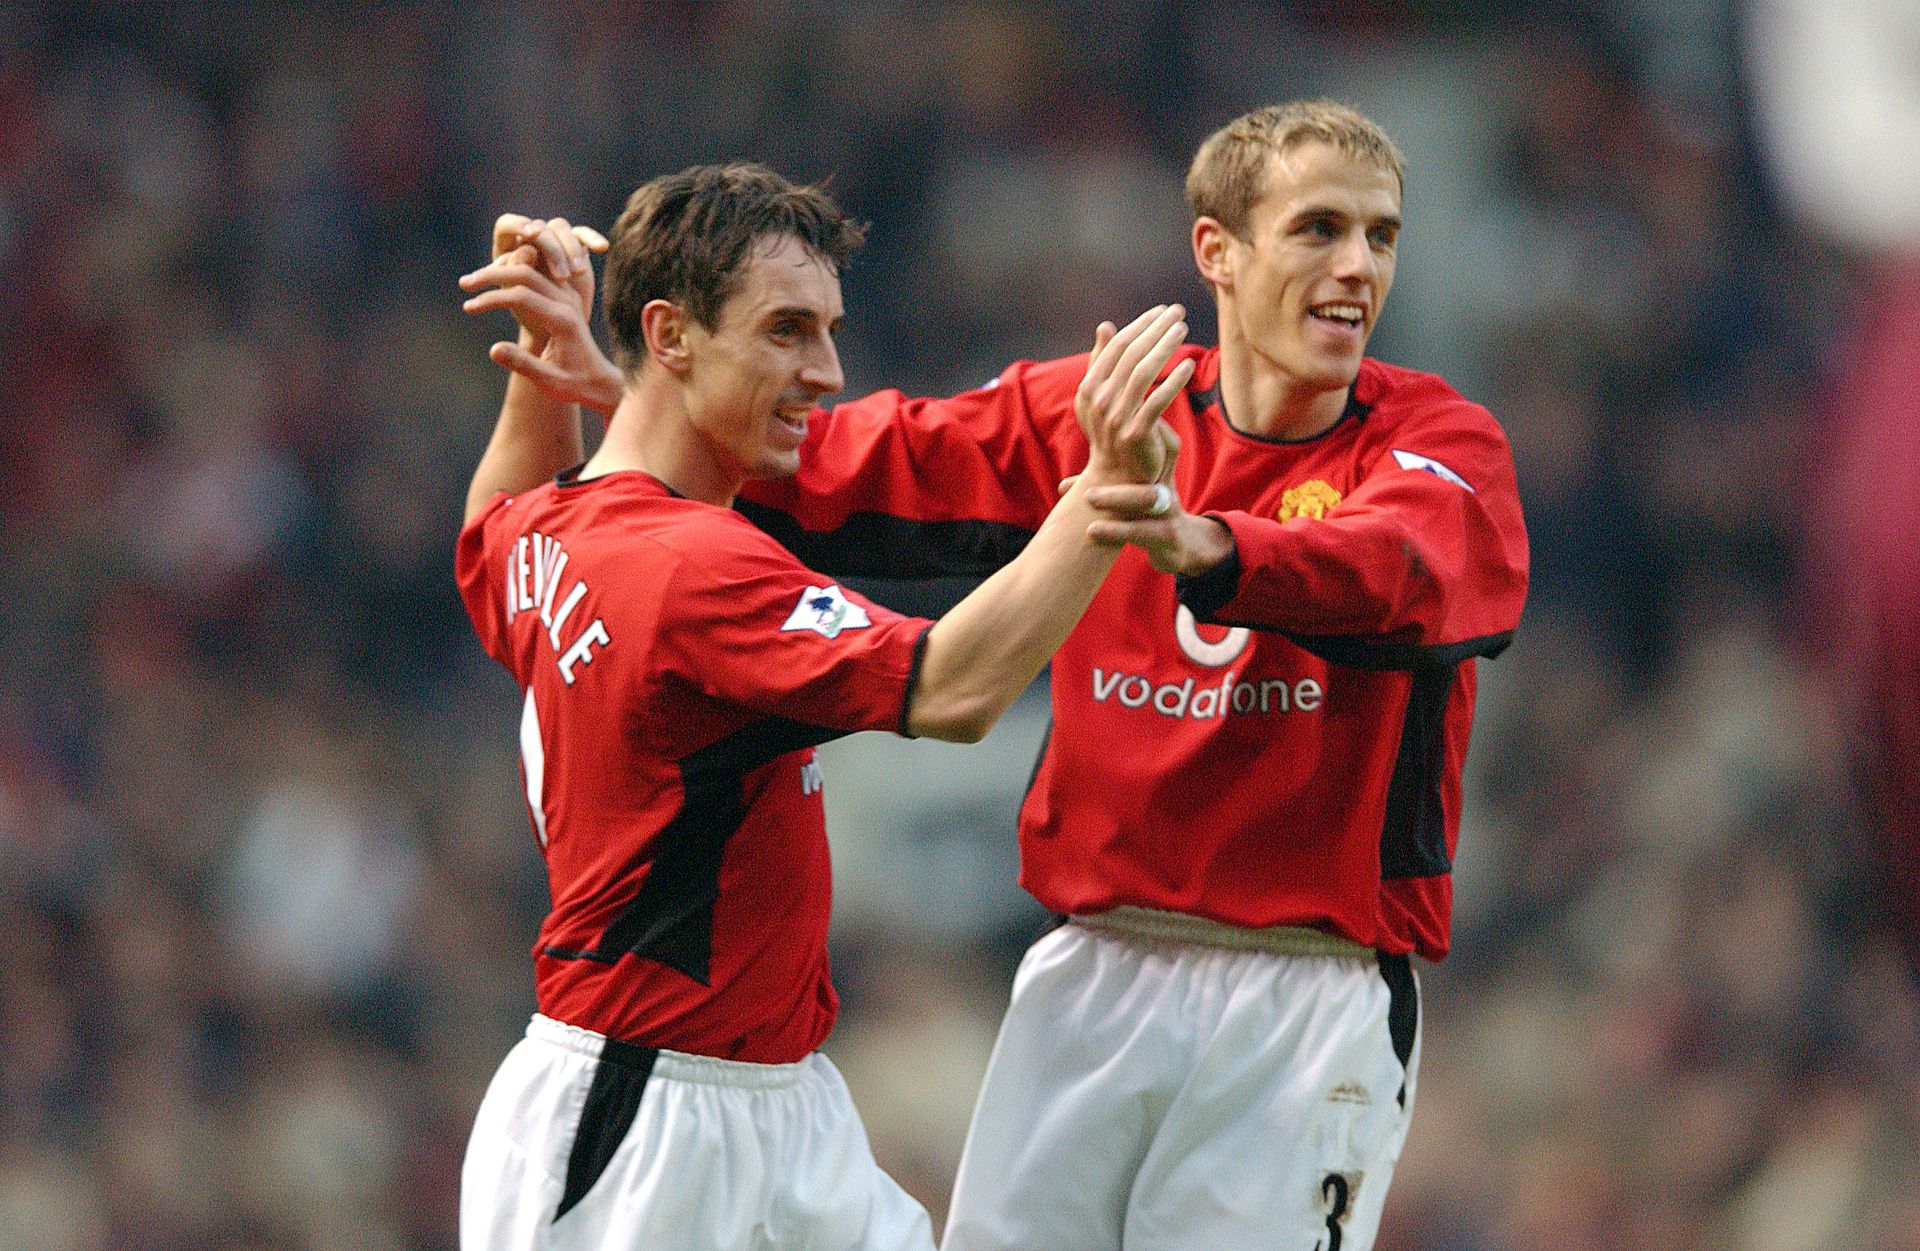 <p>                     Gary Neville and brother Phil came through the youth system together at Manchester United and were part of Sir Alex Ferguson's hugely successful side.                   </p>                                      <p>                     While Gary spent his entire career at Old Trafford, Phil played for eight years at Everton after leaving United in 2005. Between them. they won 144 caps for England and regularly featured in the same side for club and country.                   </p>